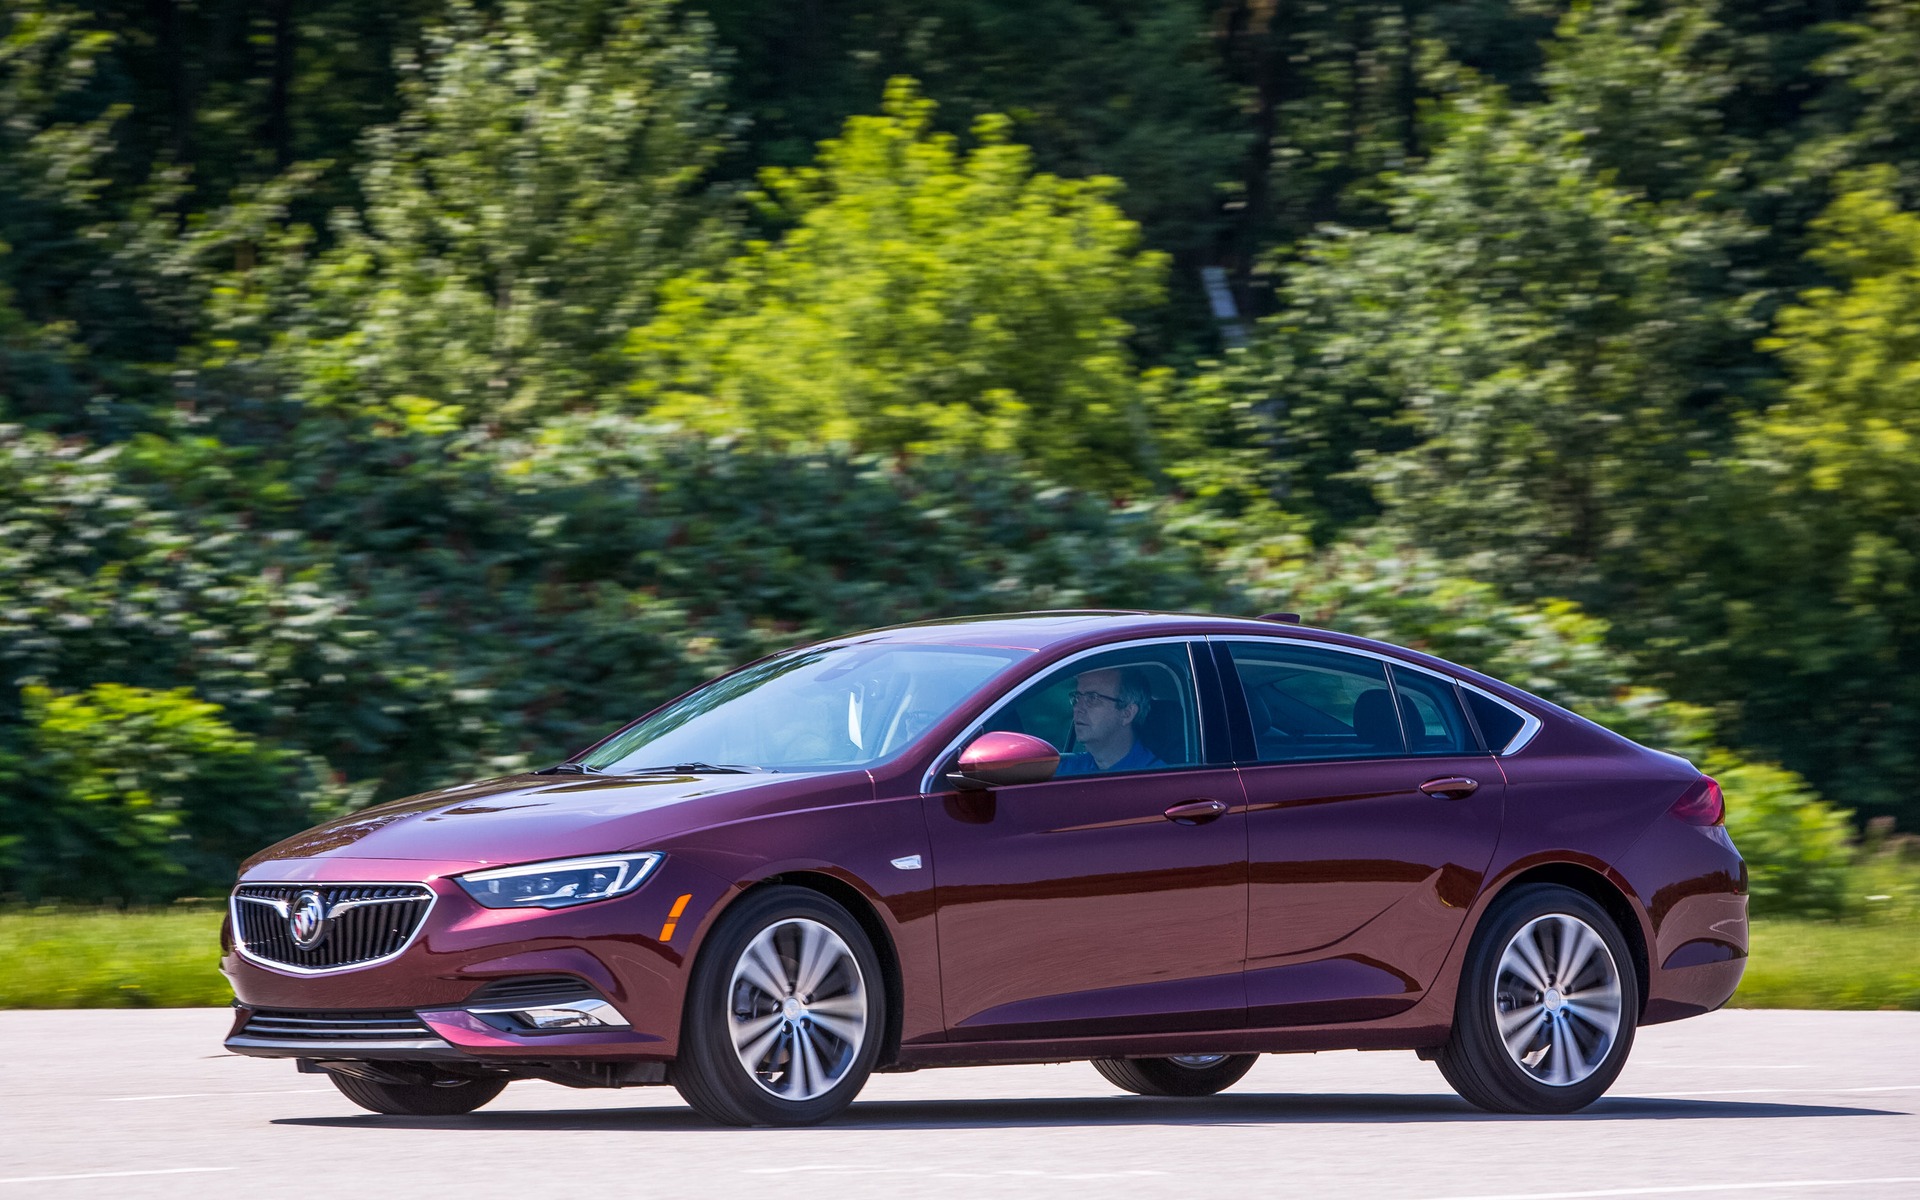 We're Heading Texas to Drive the New 2018 Buick Regal Sportback! The